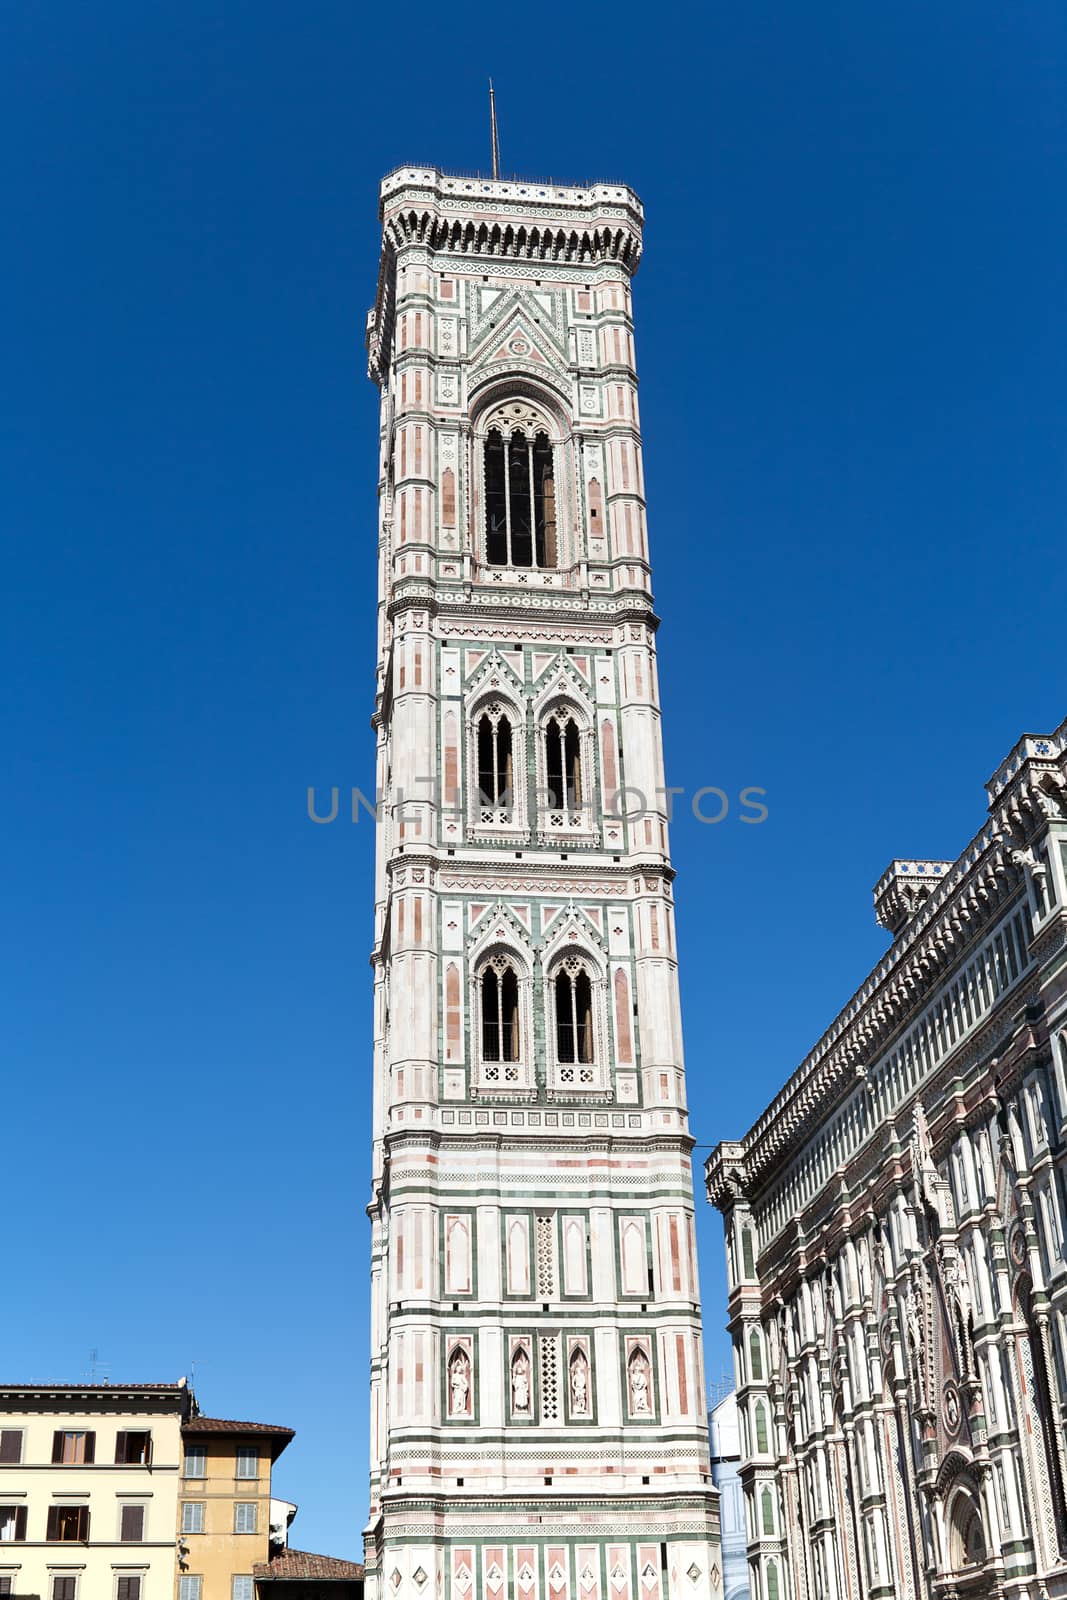  Bell Tower on Piazza del Duomo in Florence in Italy